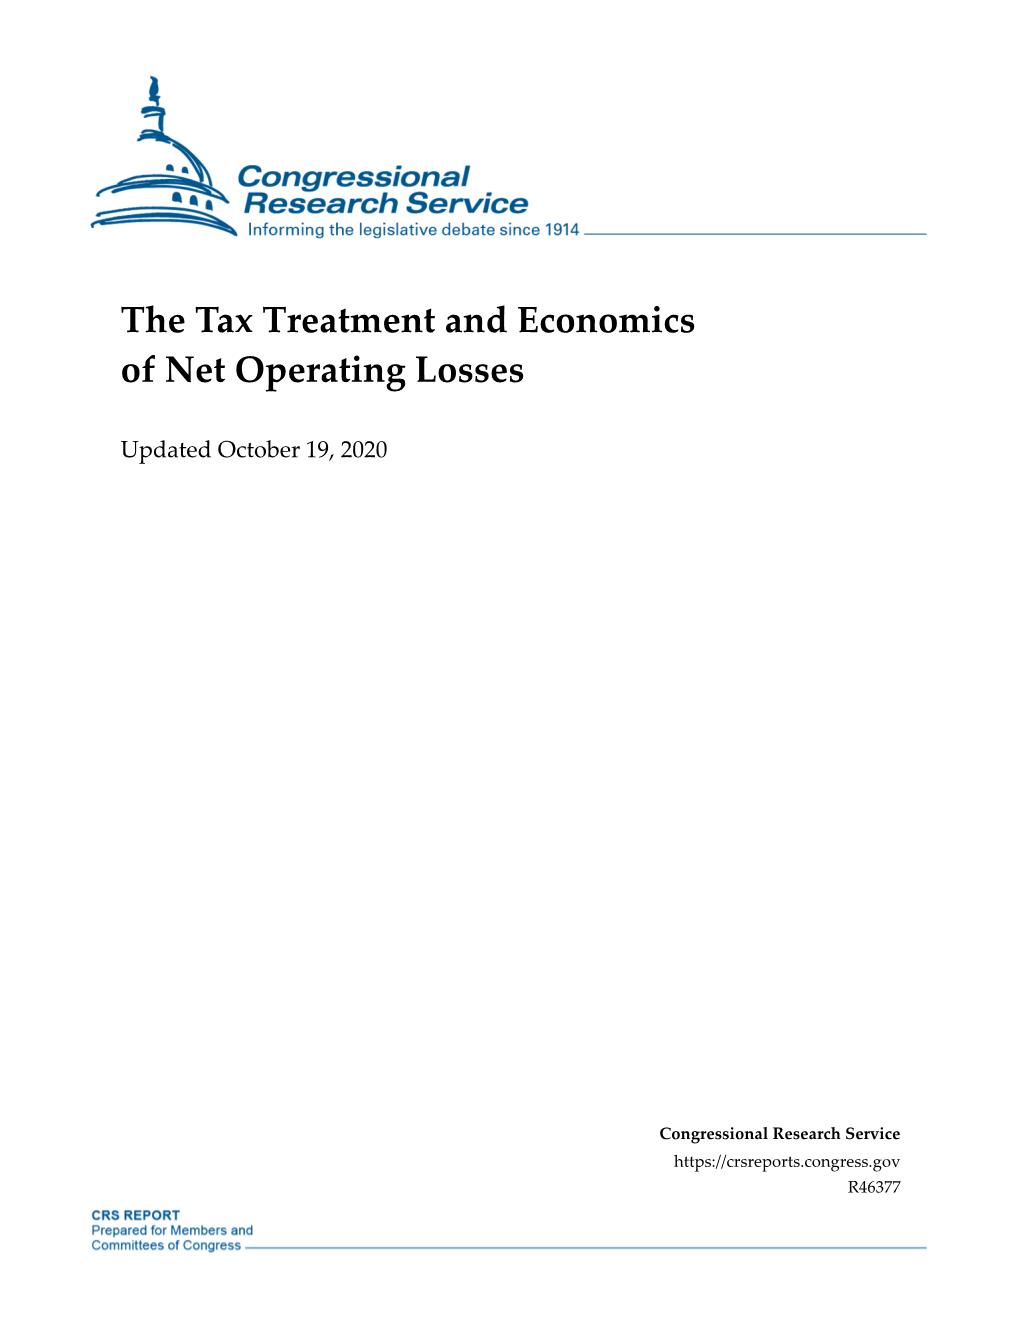 The Tax Treatment and Economics of Net Operating Losses